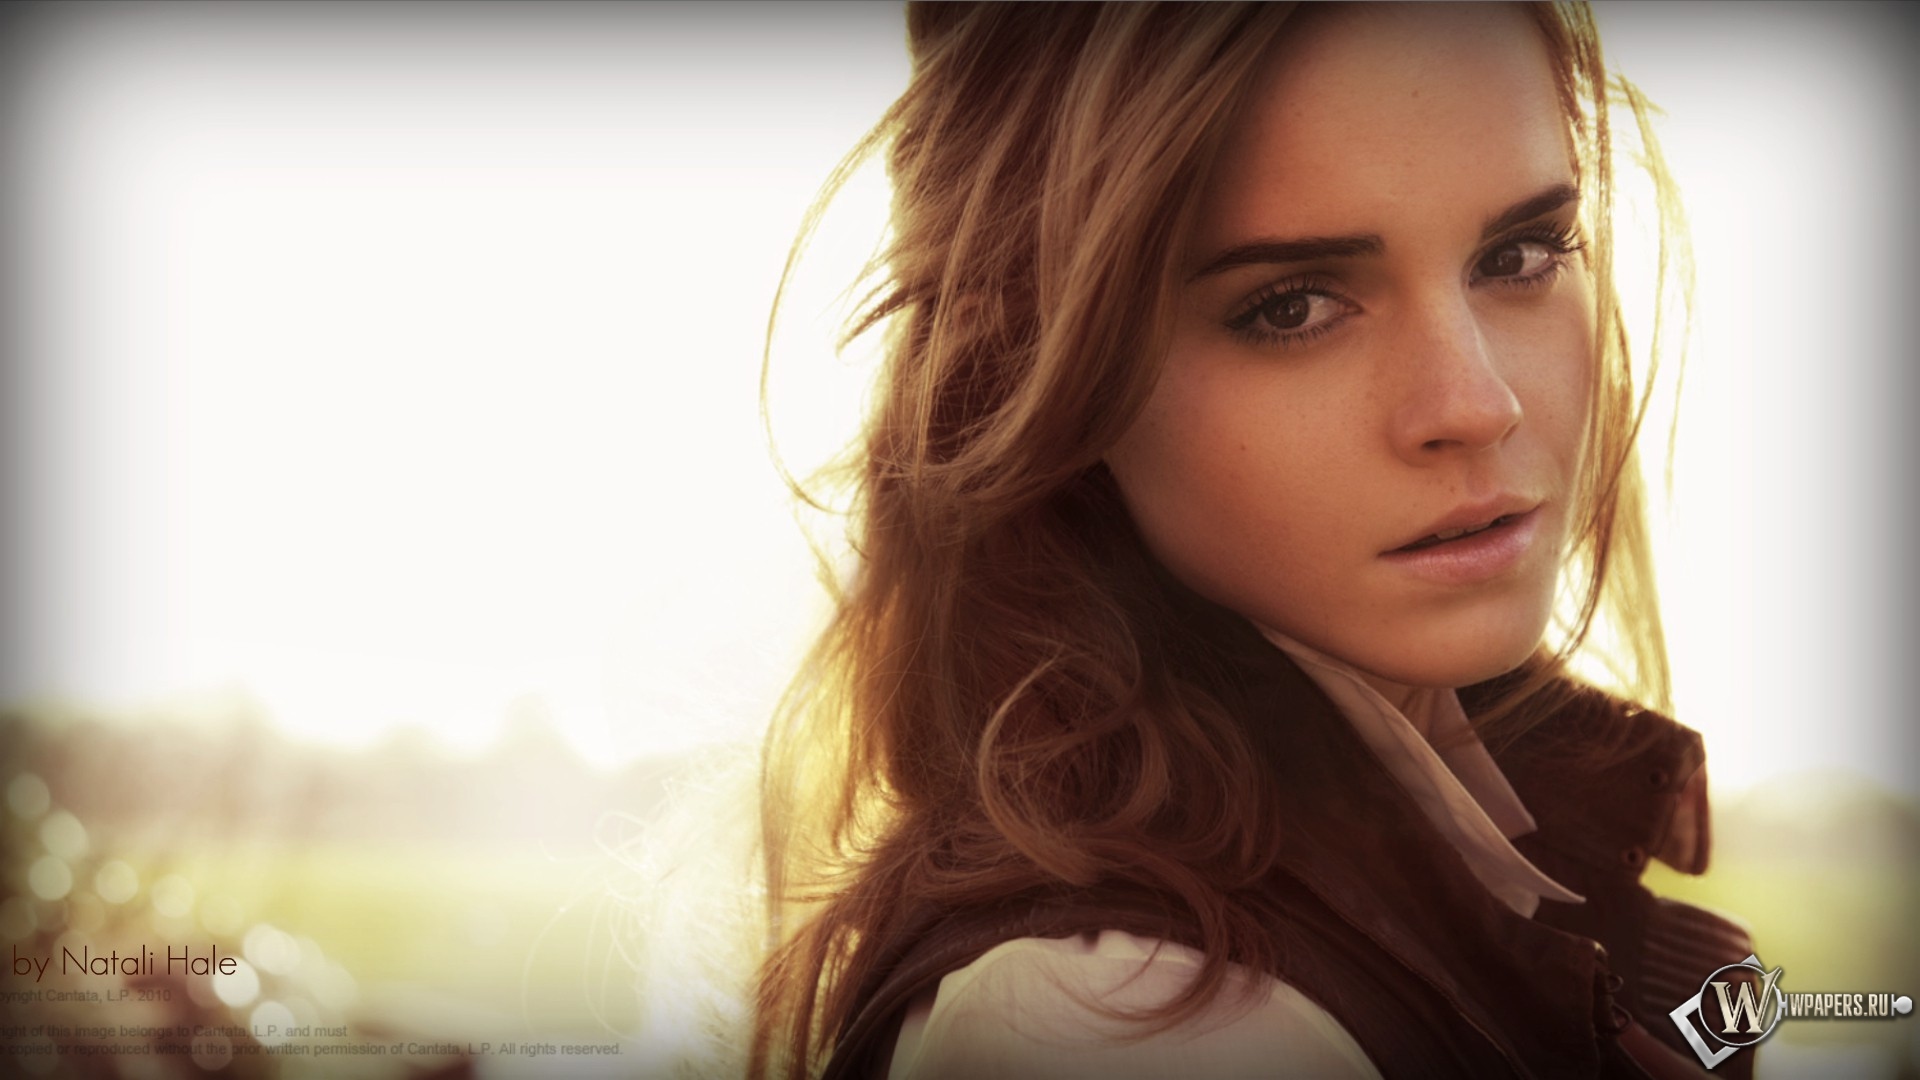 460+ Emma Watson HD Wallpapers and Backgrounds